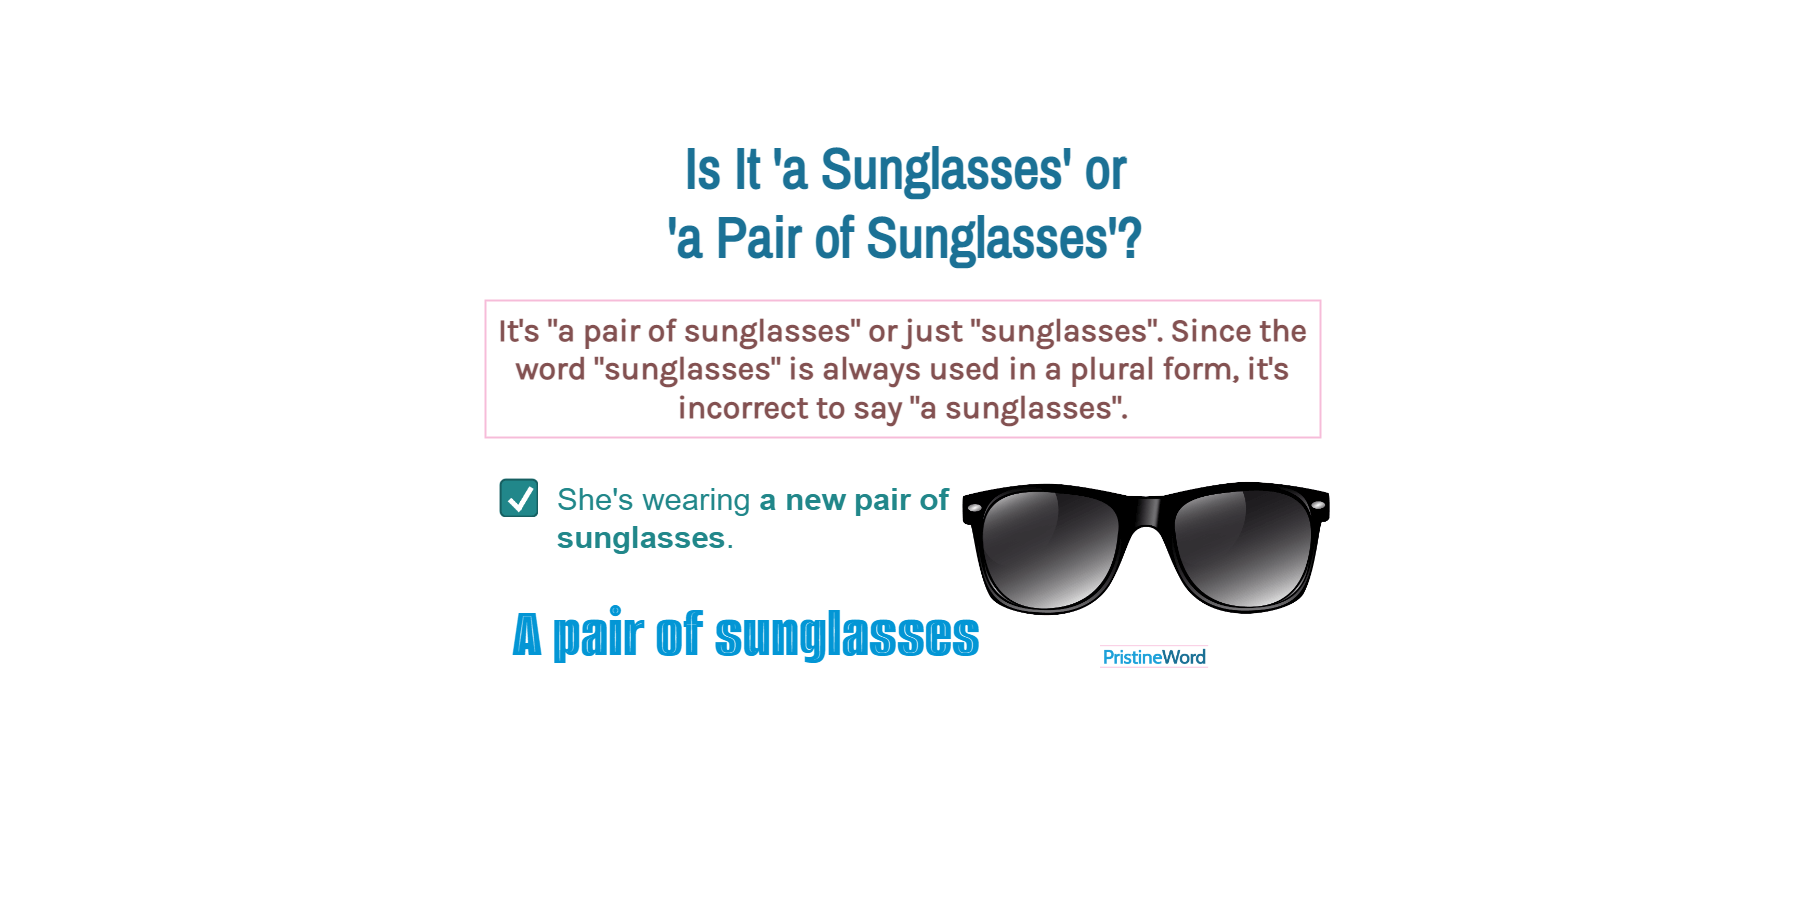 Is It 'a Sunglasses' or 'a Pair of Sunglasses'?